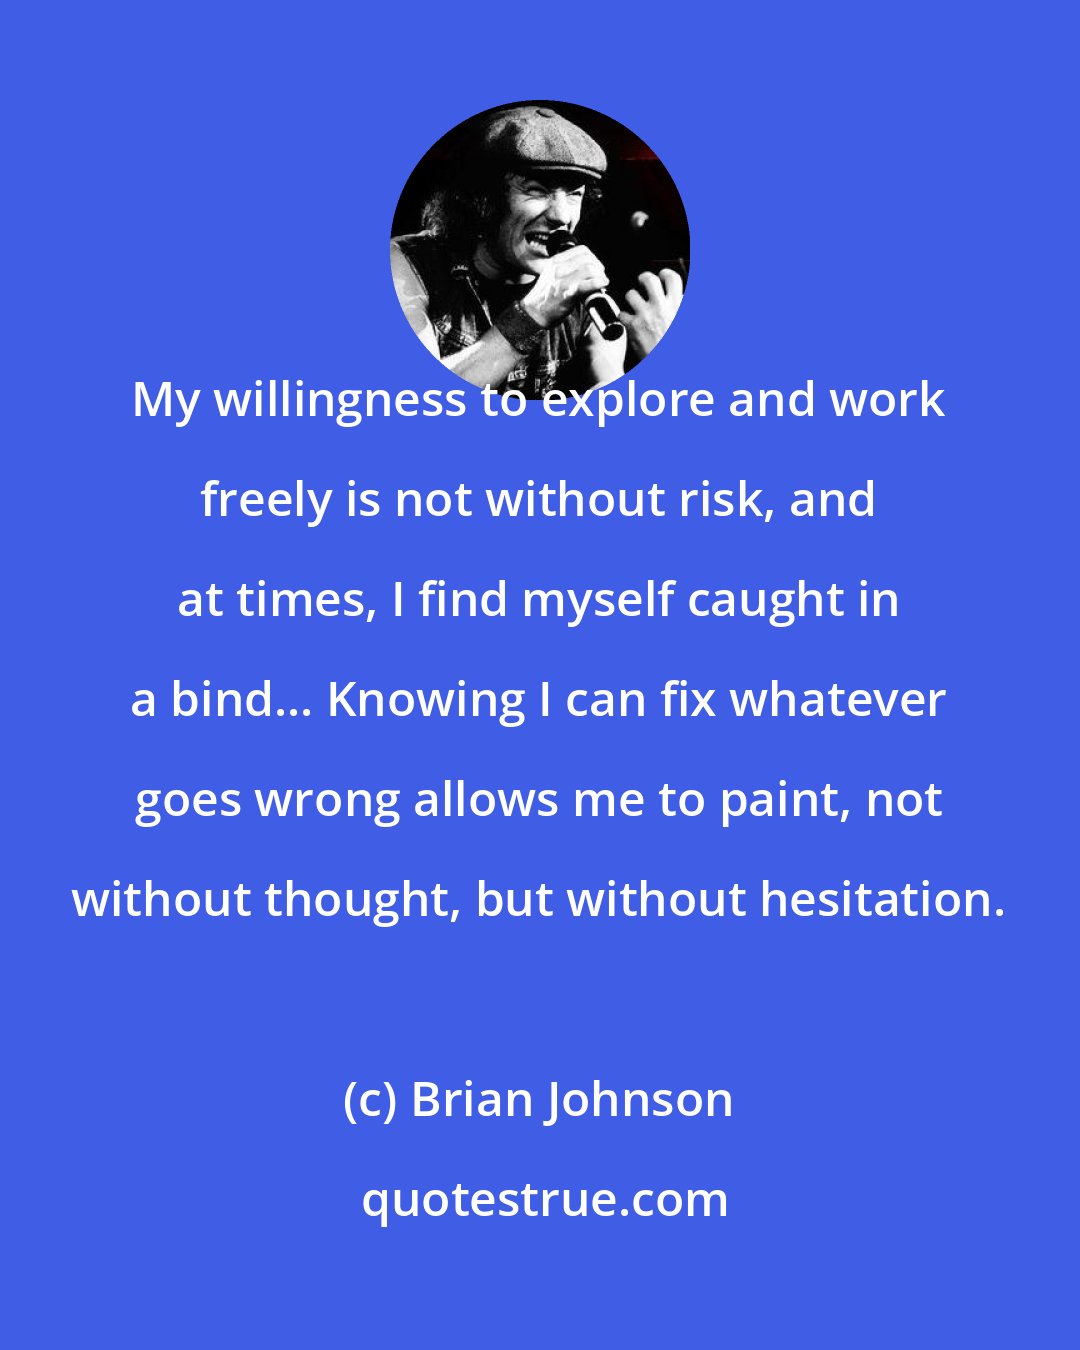 Brian Johnson: My willingness to explore and work freely is not without risk, and at times, I find myself caught in a bind... Knowing I can fix whatever goes wrong allows me to paint, not without thought, but without hesitation.